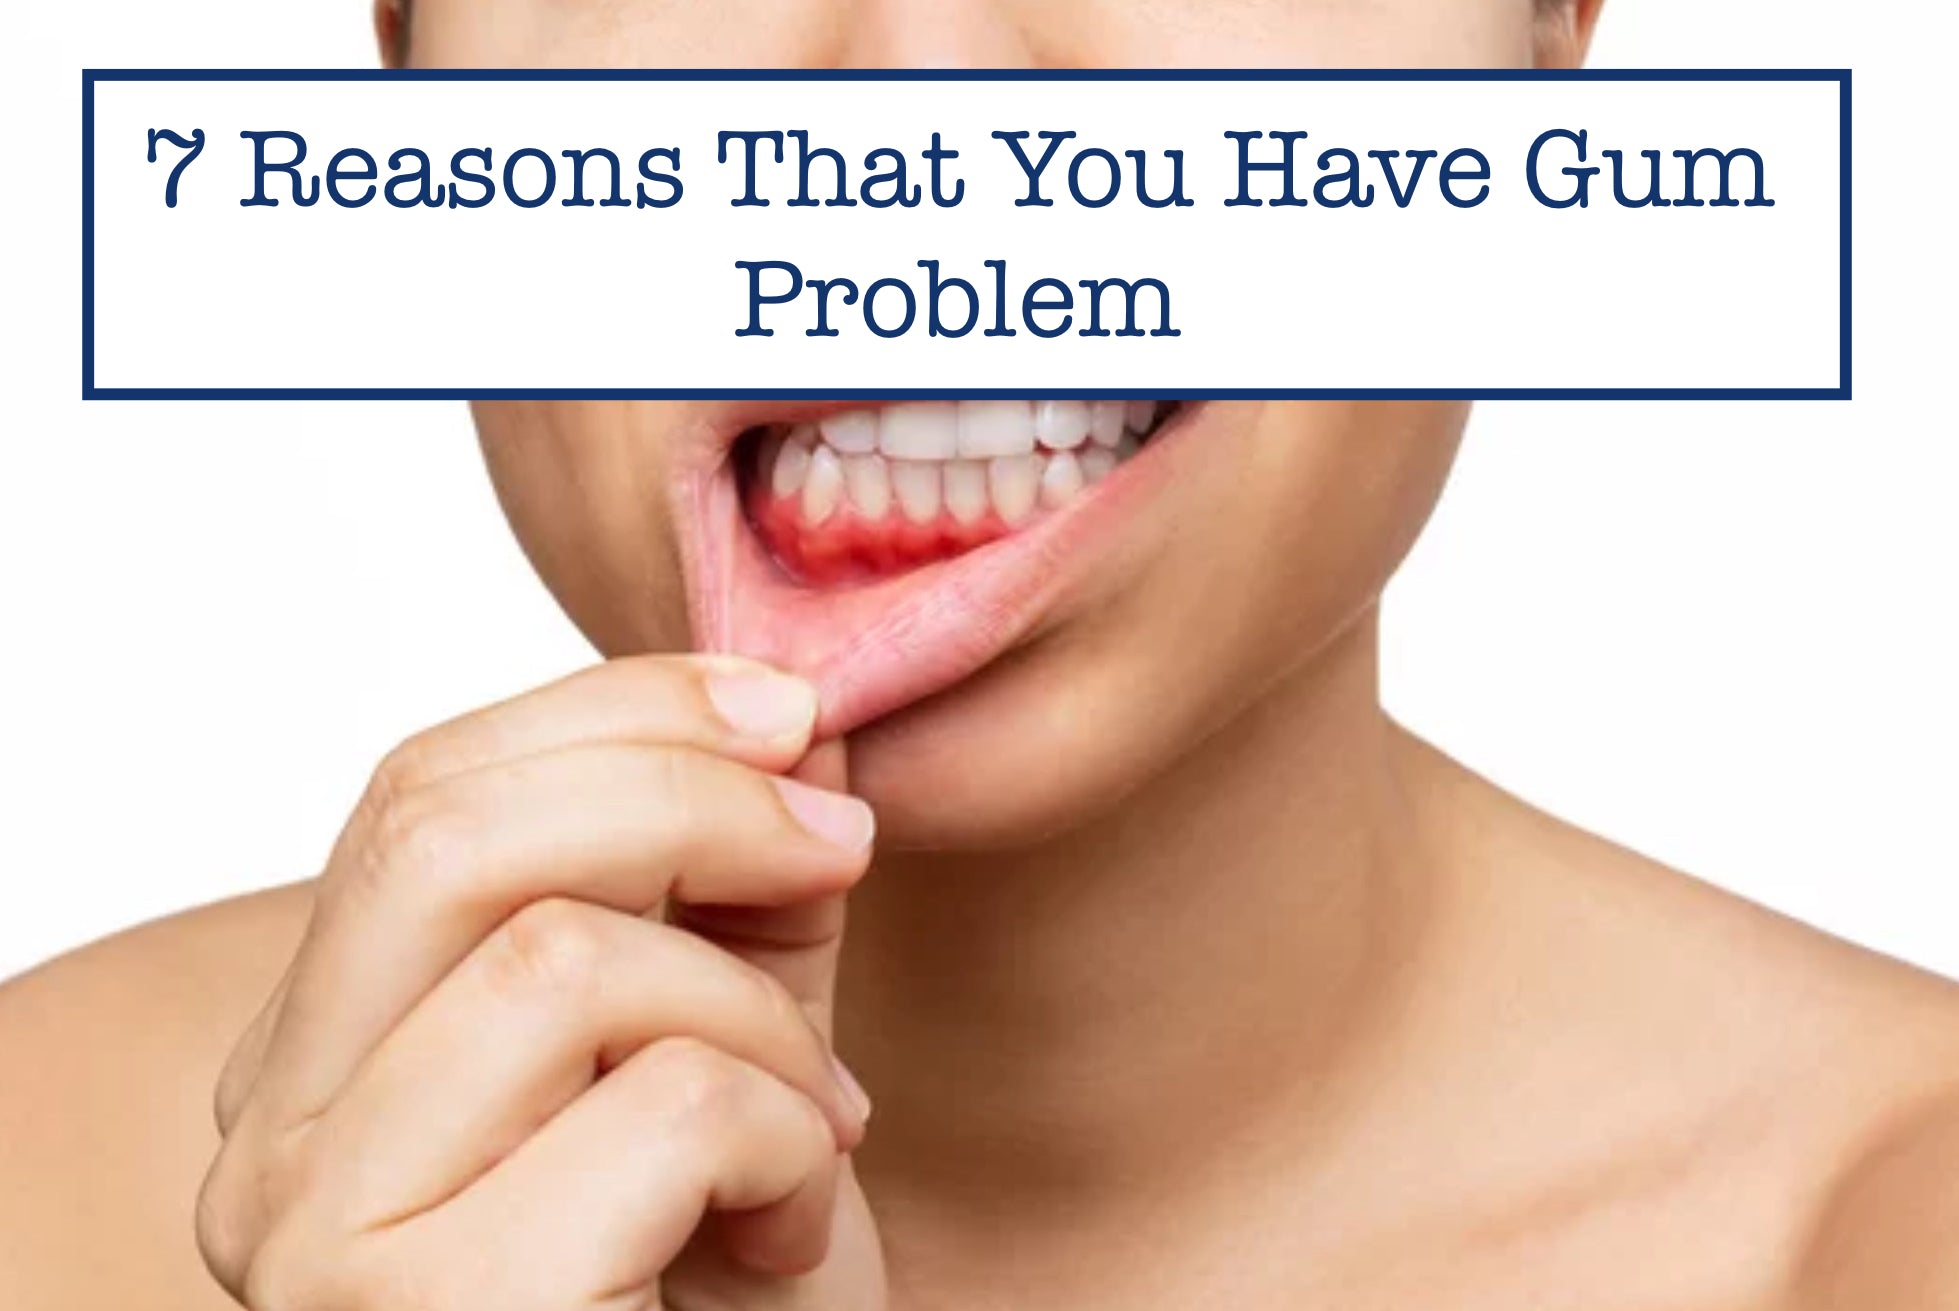 7 Reasons That You Have Gum Problem